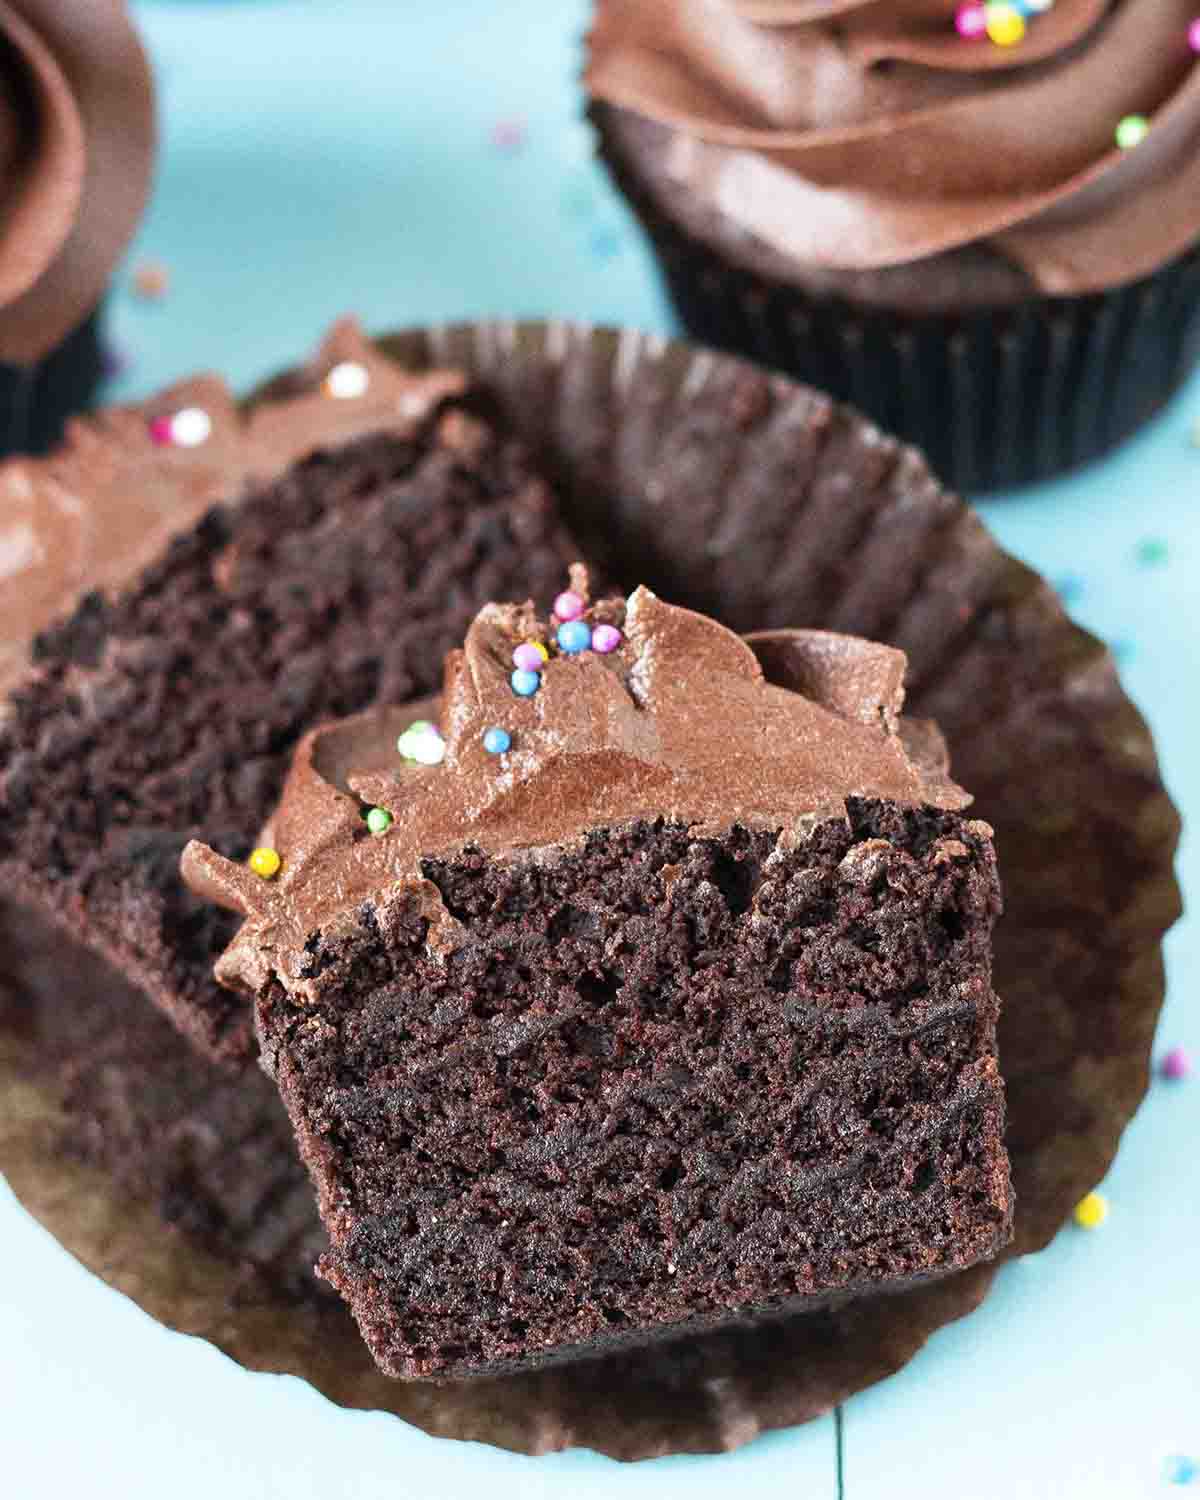 A gluten free chocolate cupcake split in two to show the fluffy texture inside.